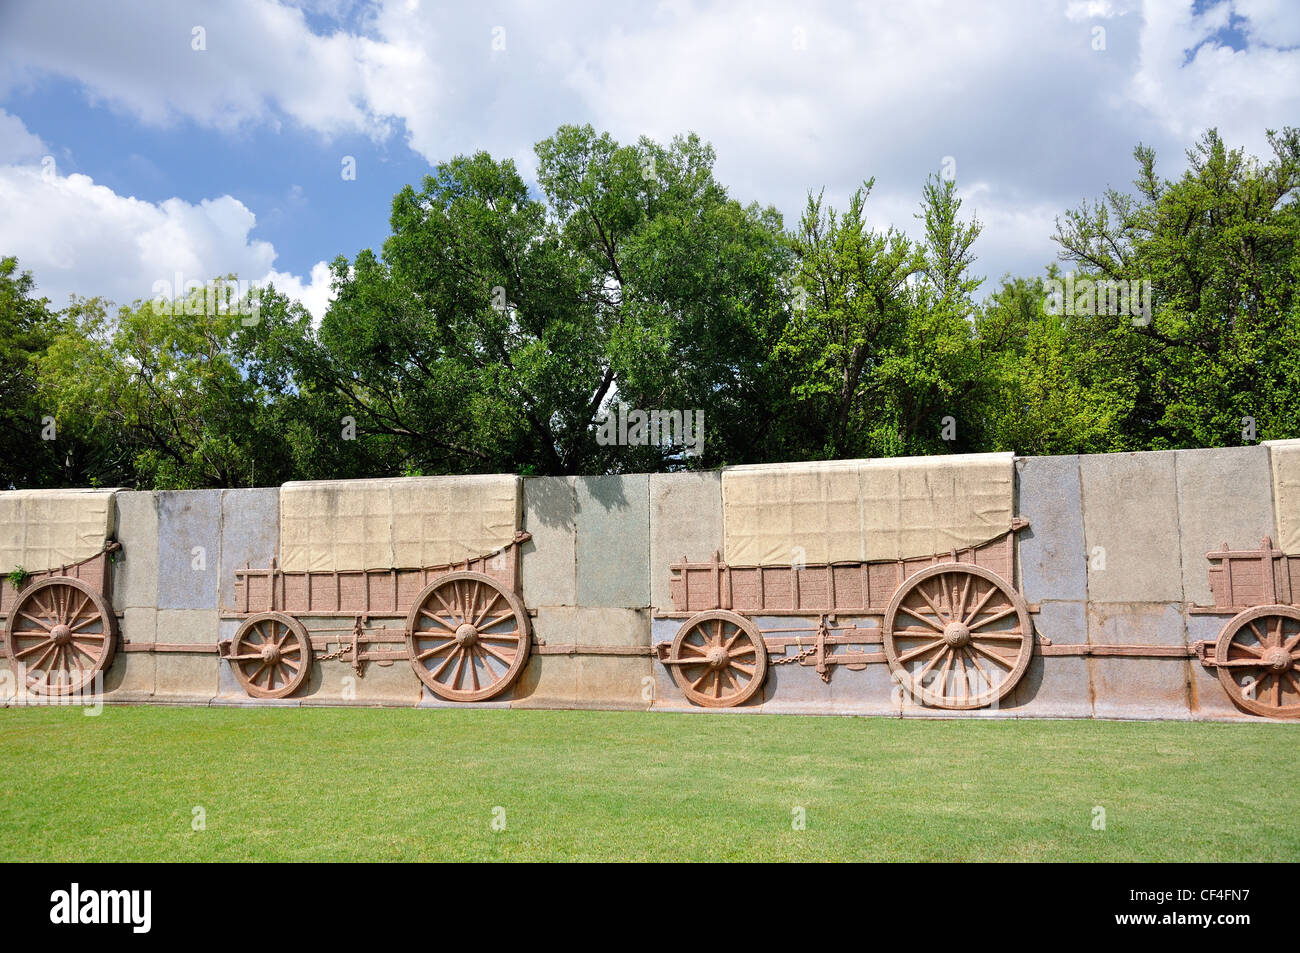 The wagon laager wall at The Voortrekker Monument, Pretoria, Gauteng Province, Republic of South Africa Stock Photo